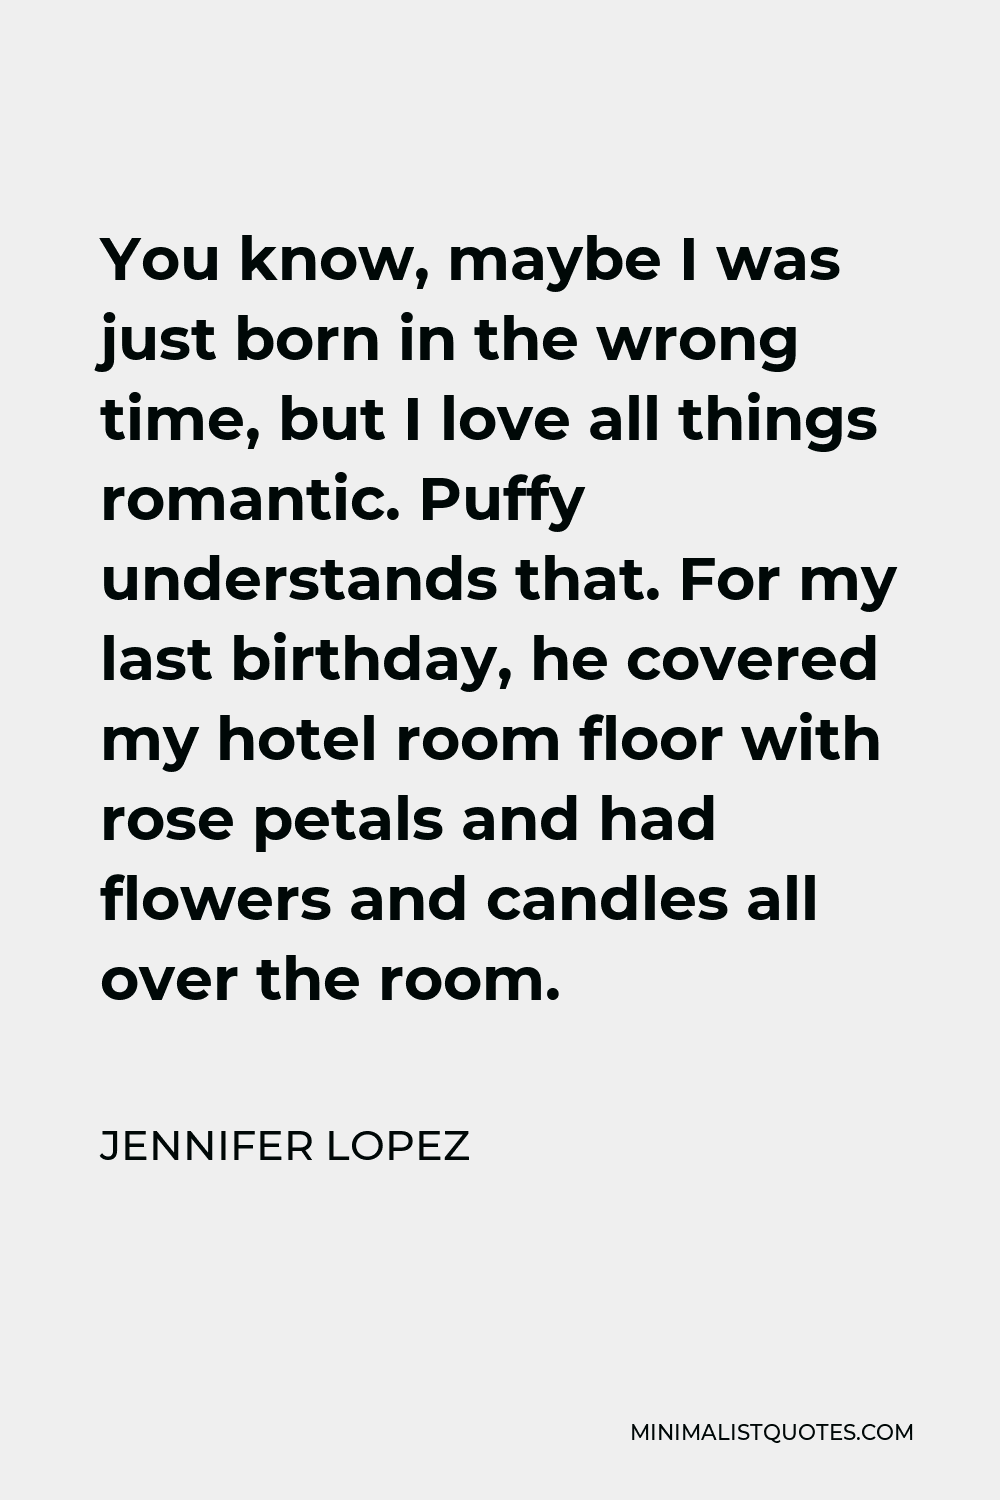 Jennifer Lopez Quote - You know, maybe I was just born in the wrong time, but I love all things romantic. Puffy understands that. For my last birthday, he covered my hotel room floor with rose petals and had flowers and candles all over the room.